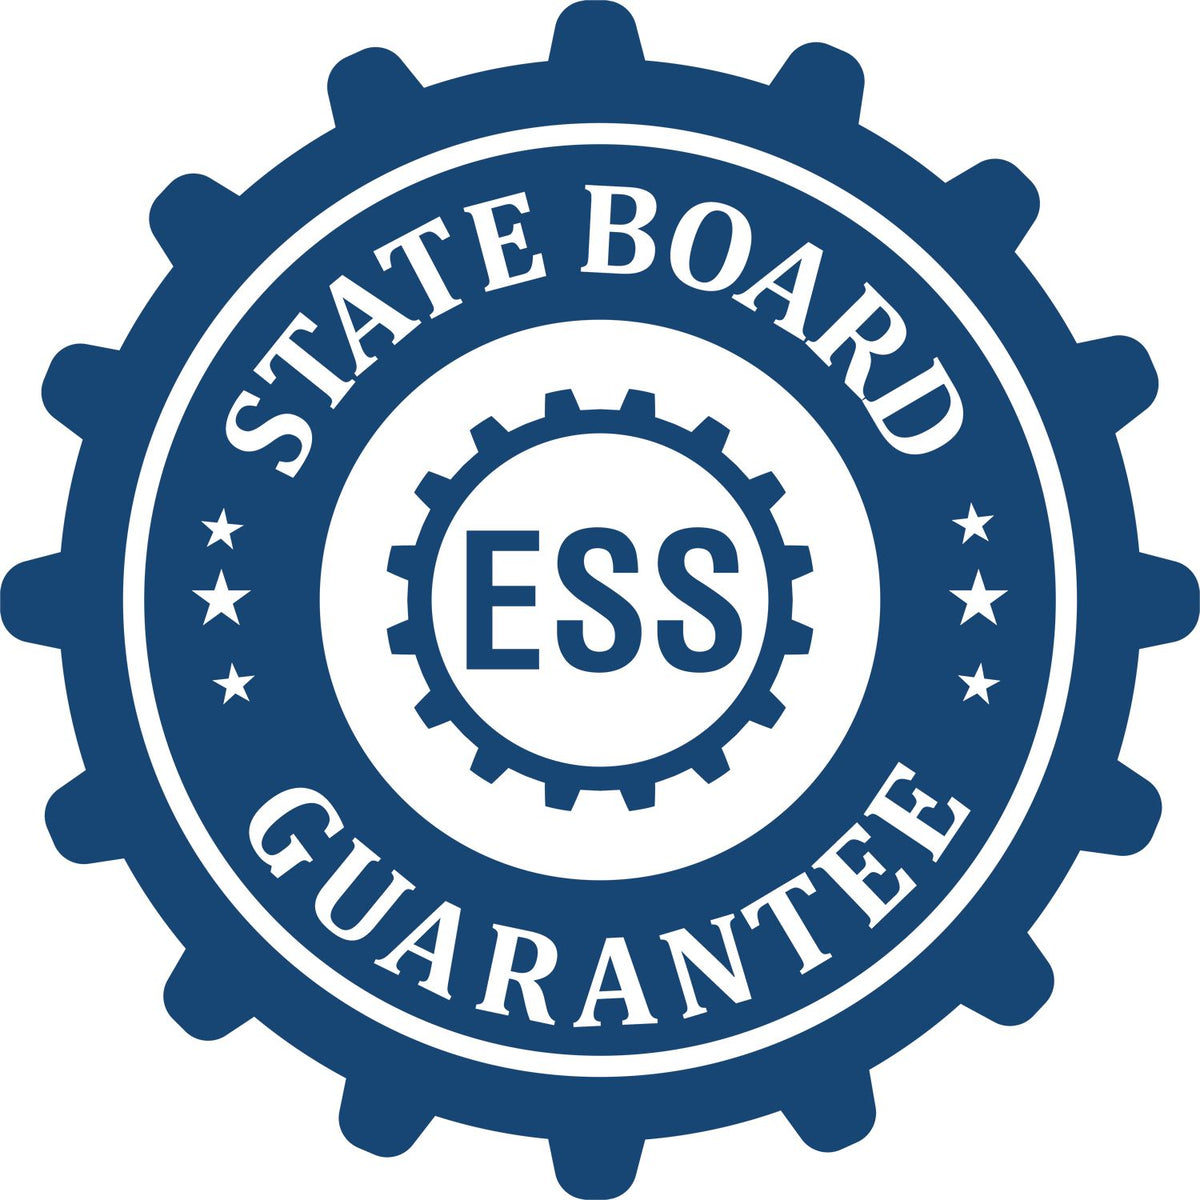 An emblem in a gear shape illustrating a state board guarantee for the Soft Texas Professional Geologist Seal